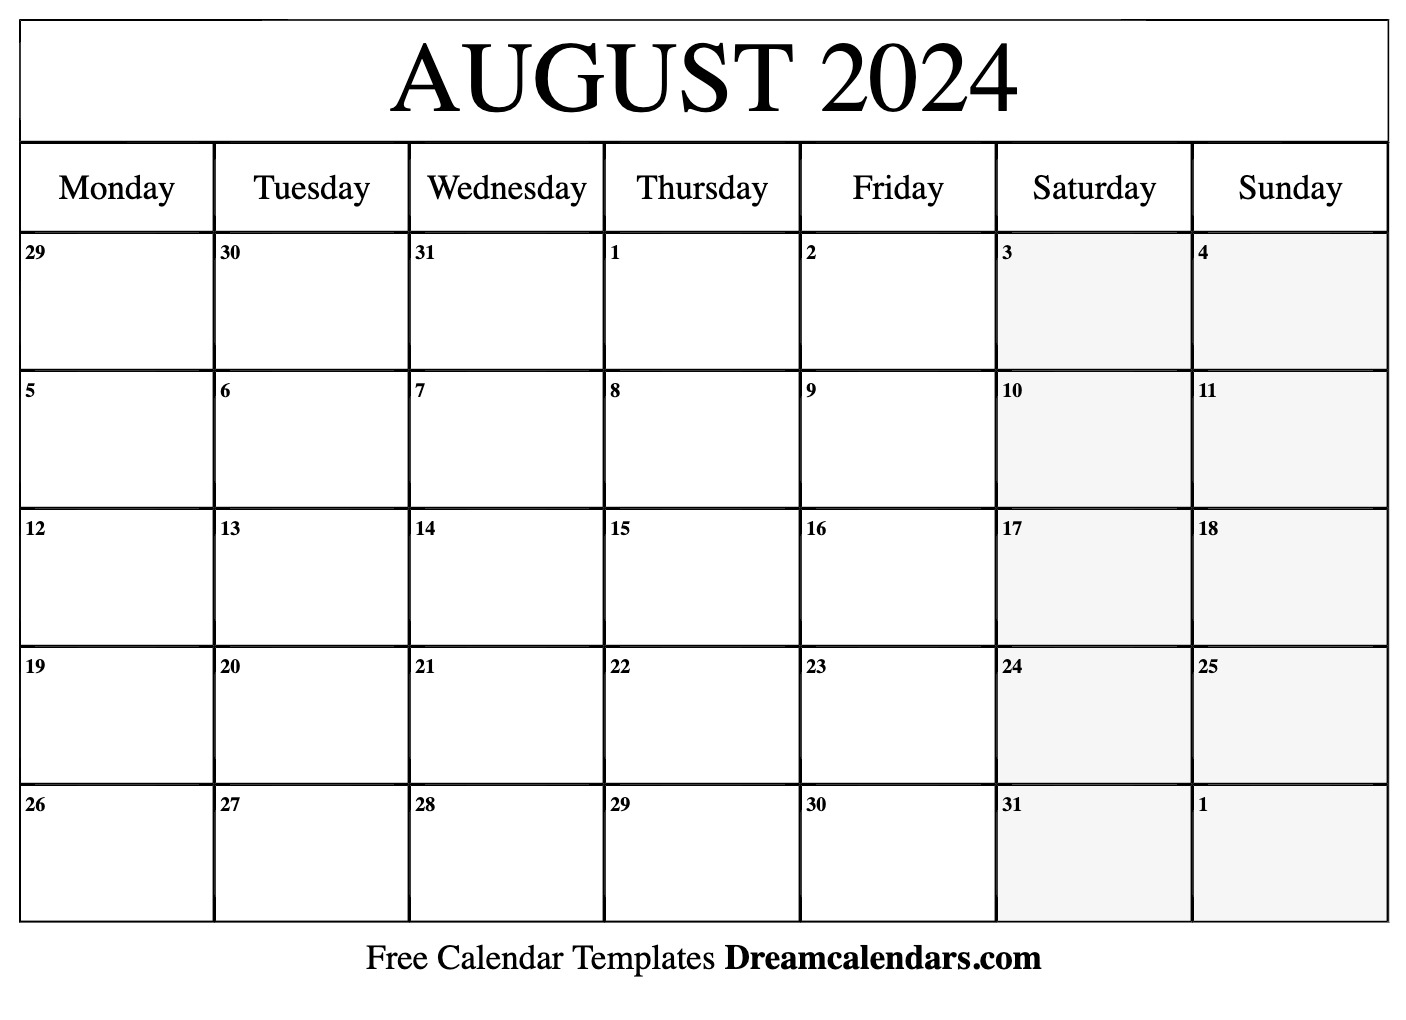 August 2024 Calendar | Free Blank Printable With Holidays for August Printable Calendar 2024